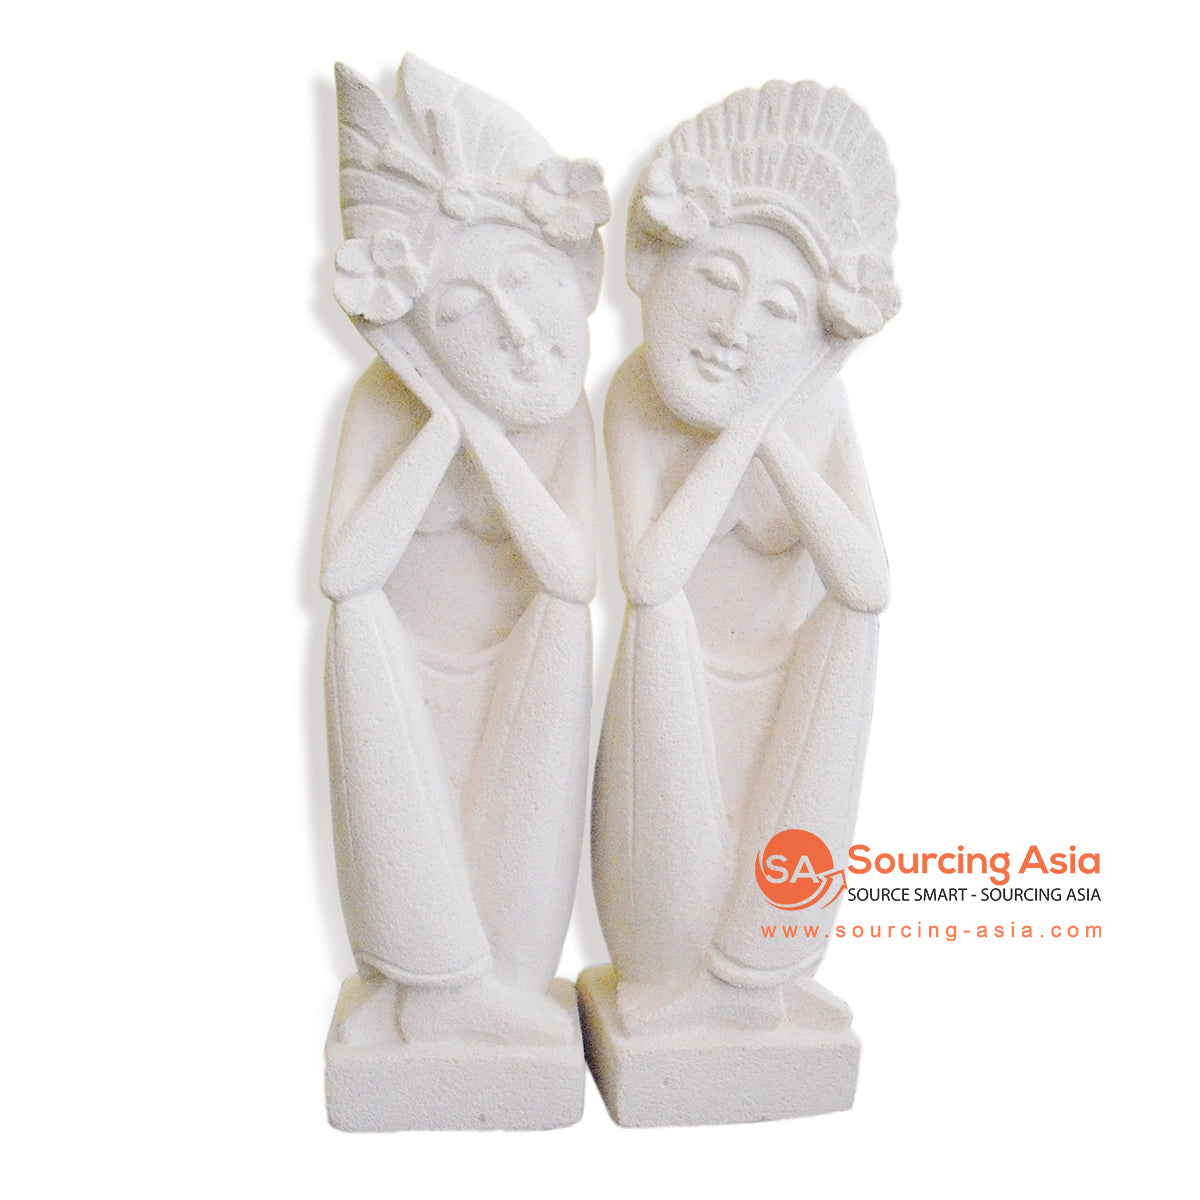 MHB046-20-1 STONE DREAMING BALINESE COUPLE STATUE